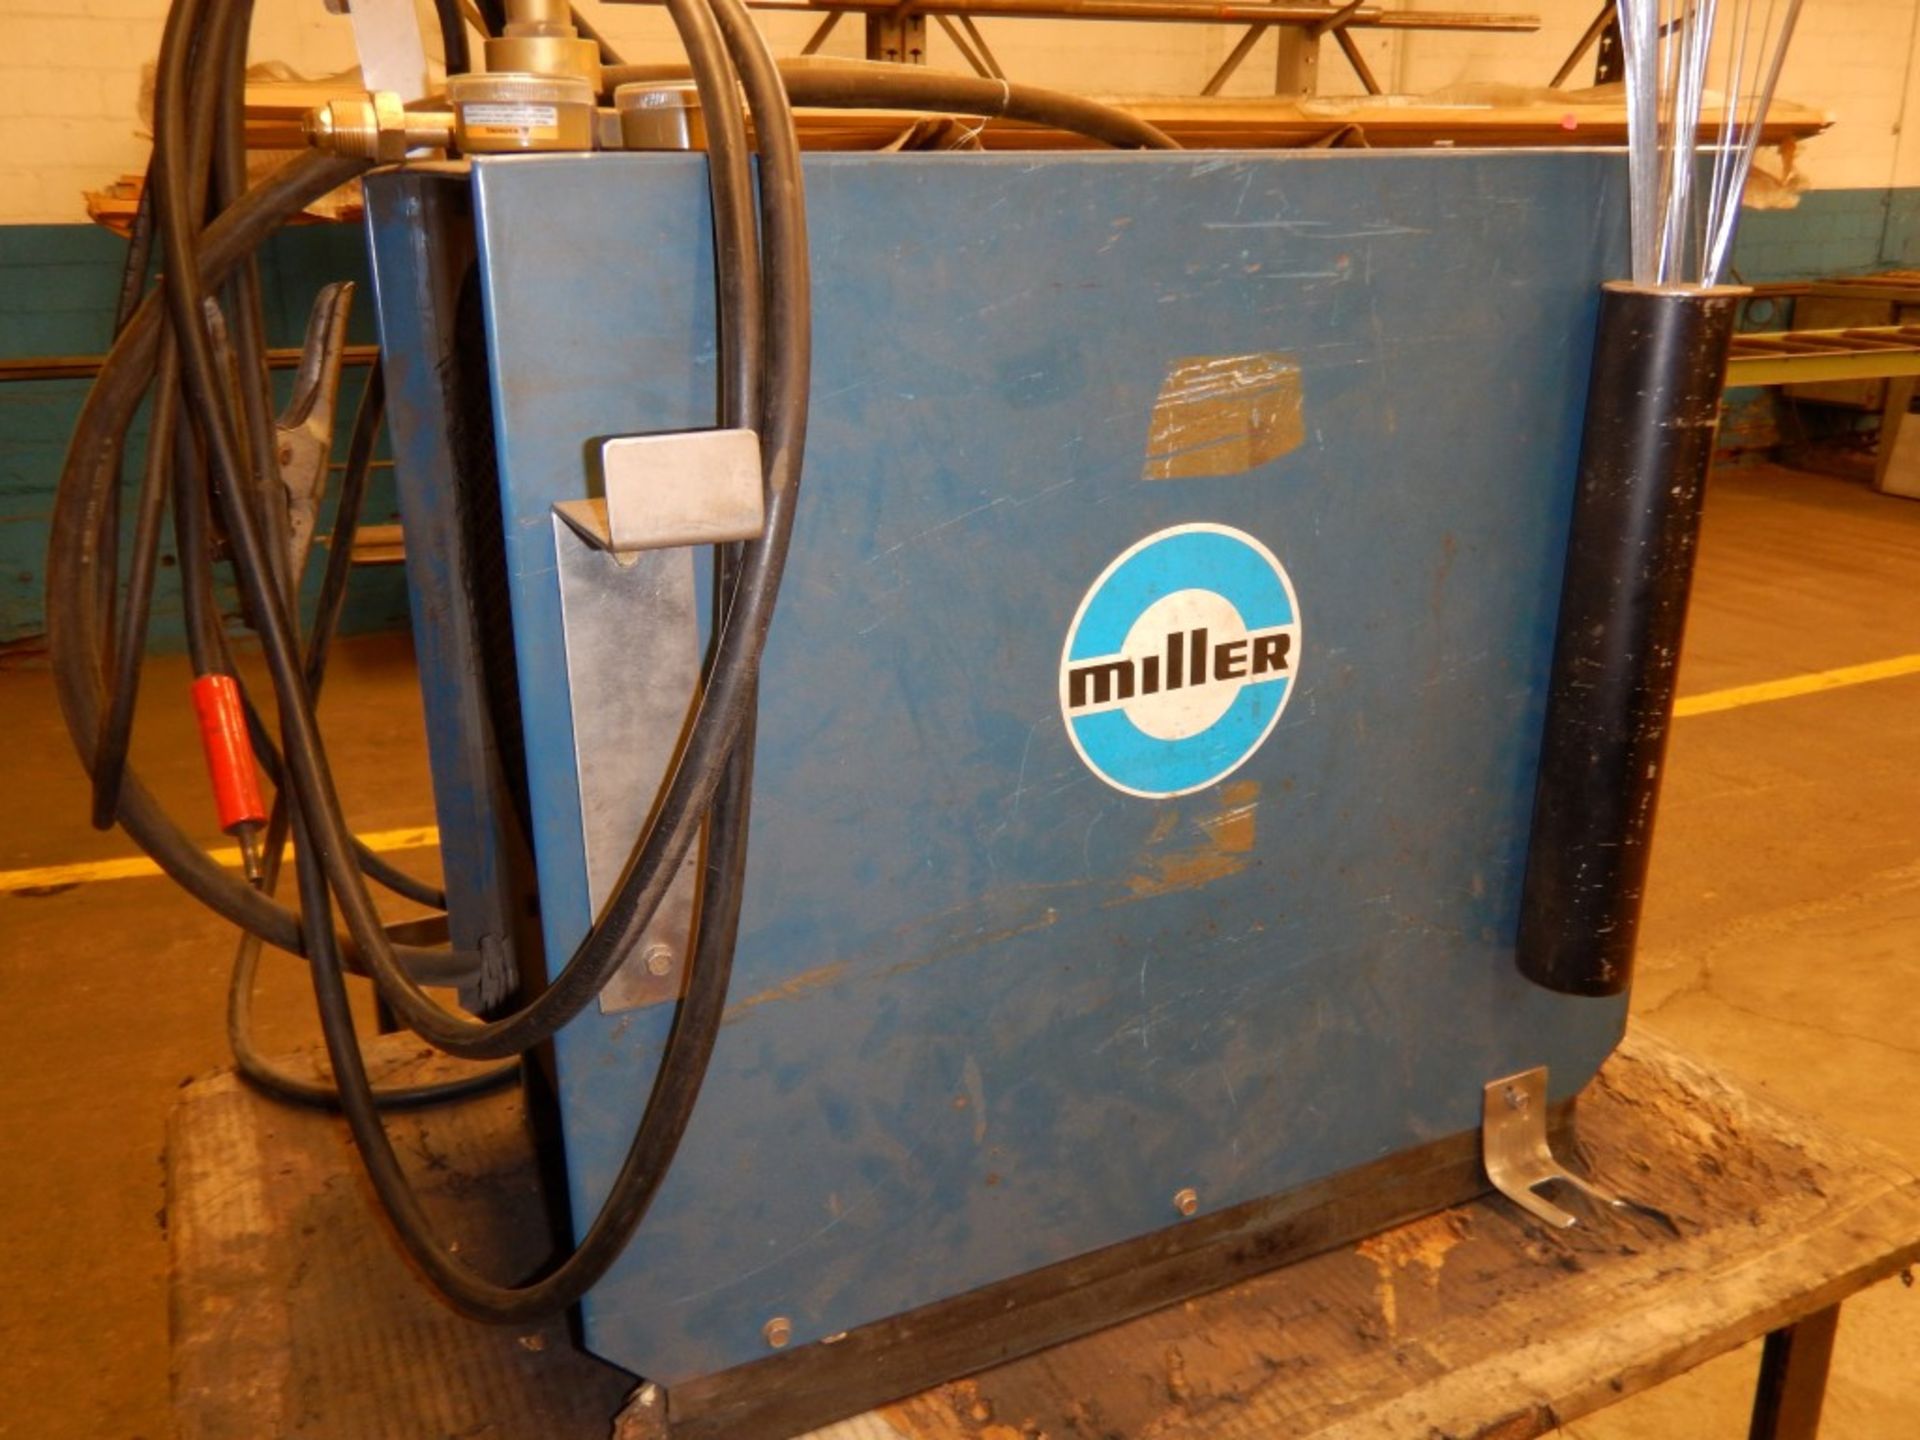 Miller Econo Twin HF Constant Current AC/DC Arc Welding Power Source Welder, Style No.: JE-11 - Image 2 of 3